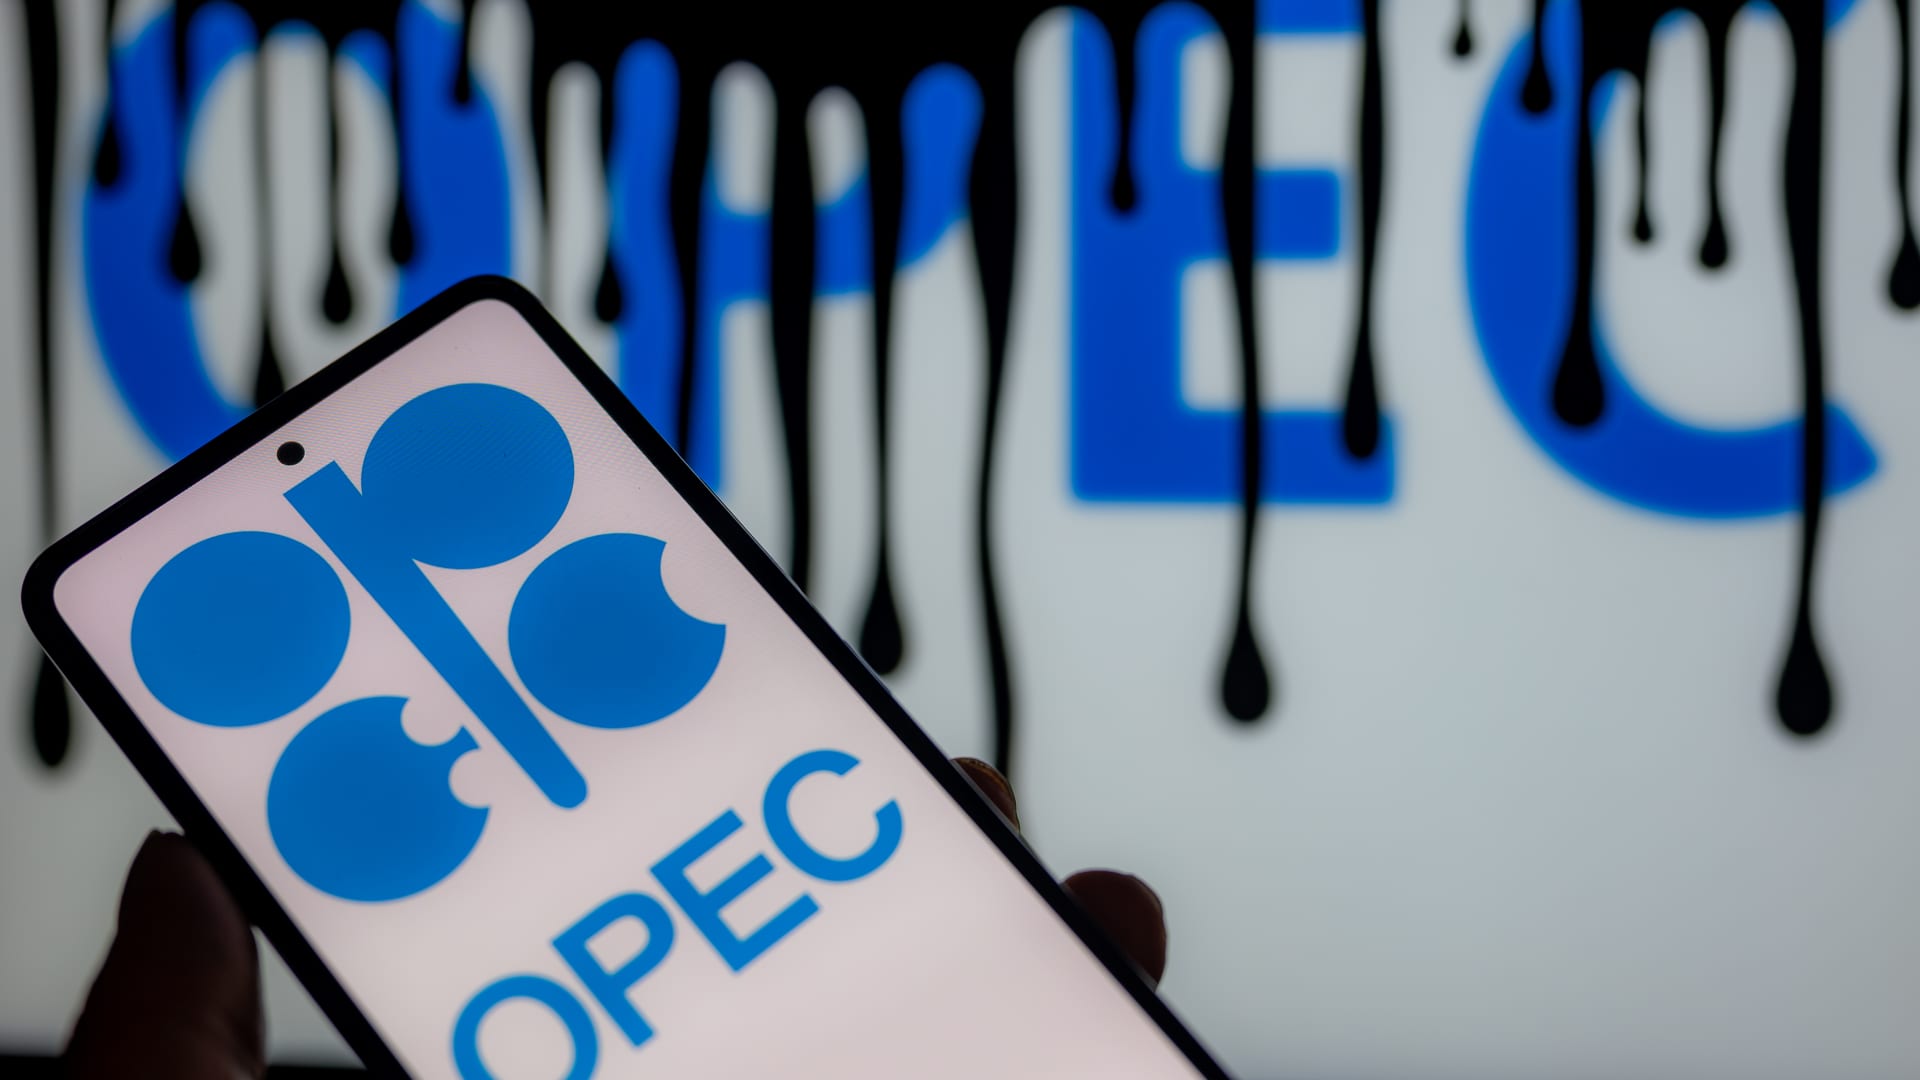 Oil group OPEC and its allies delay policy-setting meeting by four days